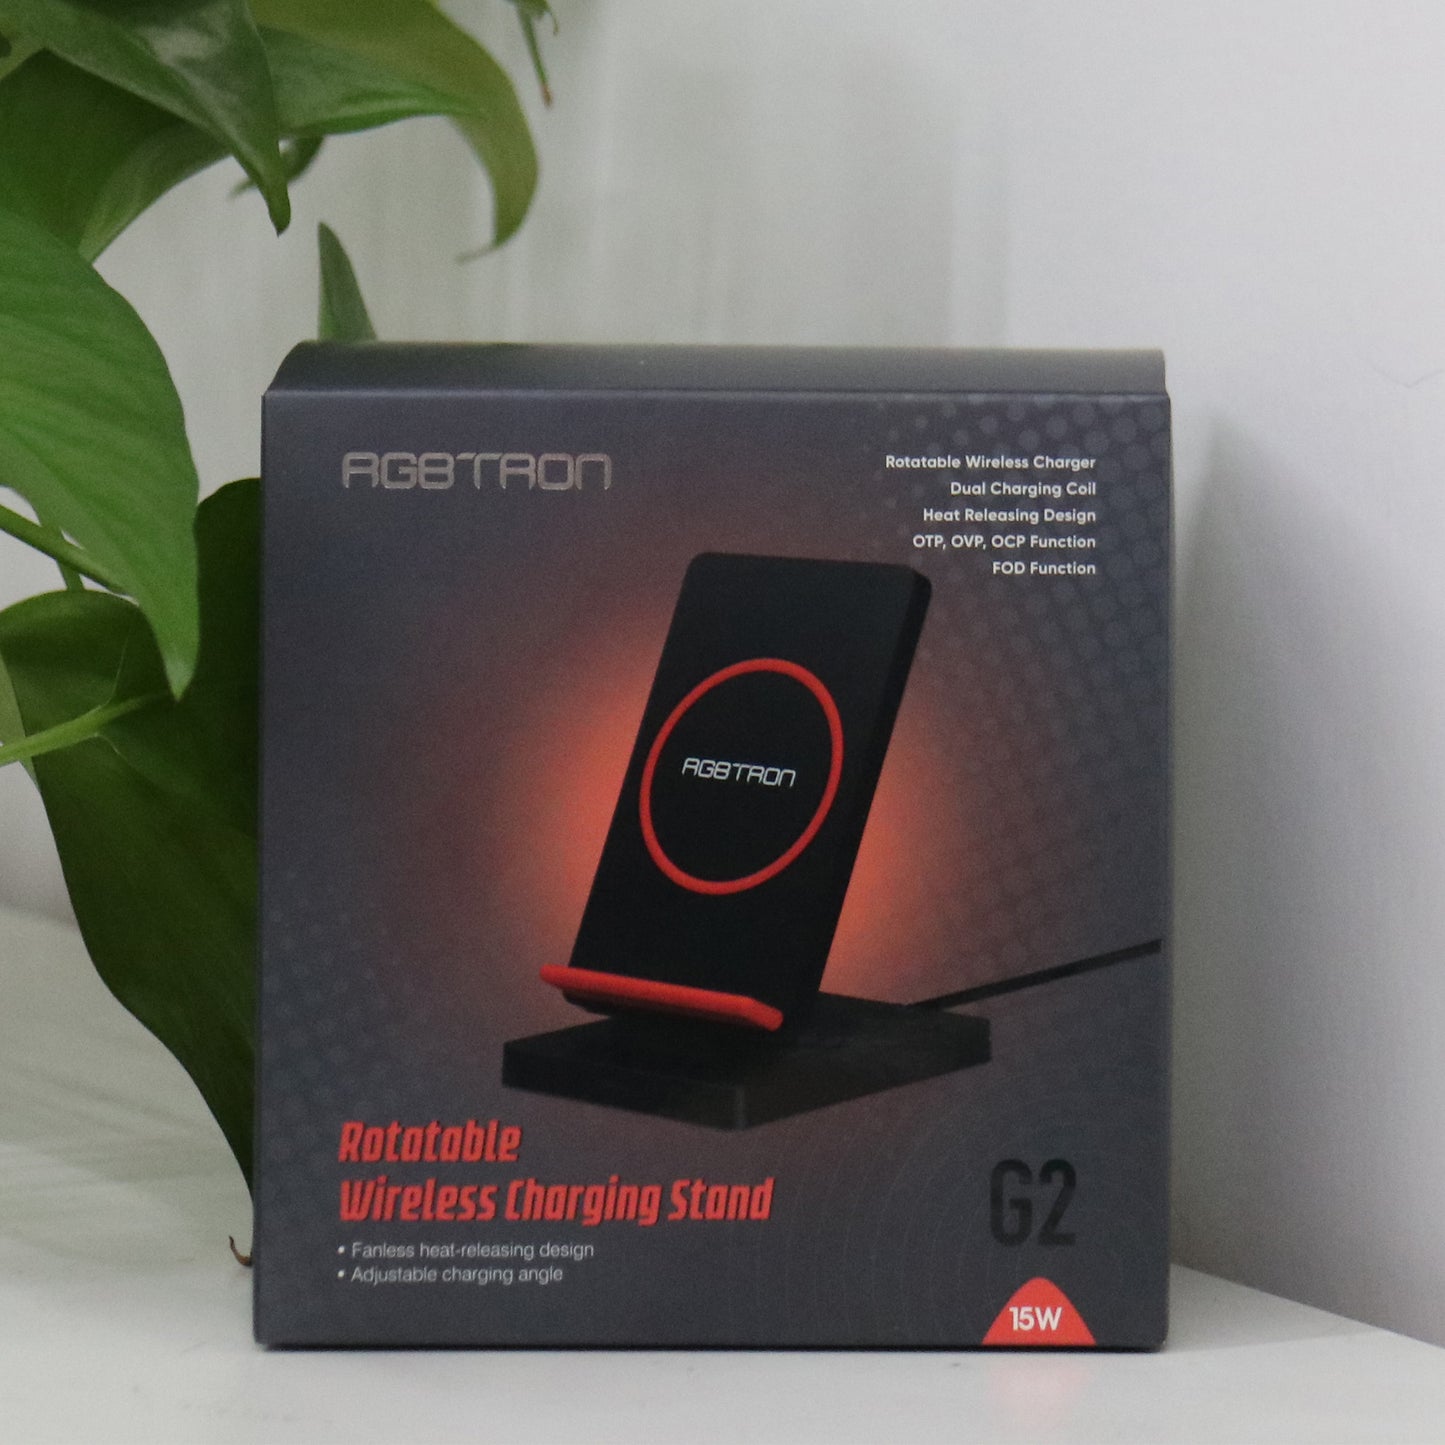 RGBTRON DT-G2 - 15W FAST ROTATABLE WIRELESS CHARGER FOR PHONE